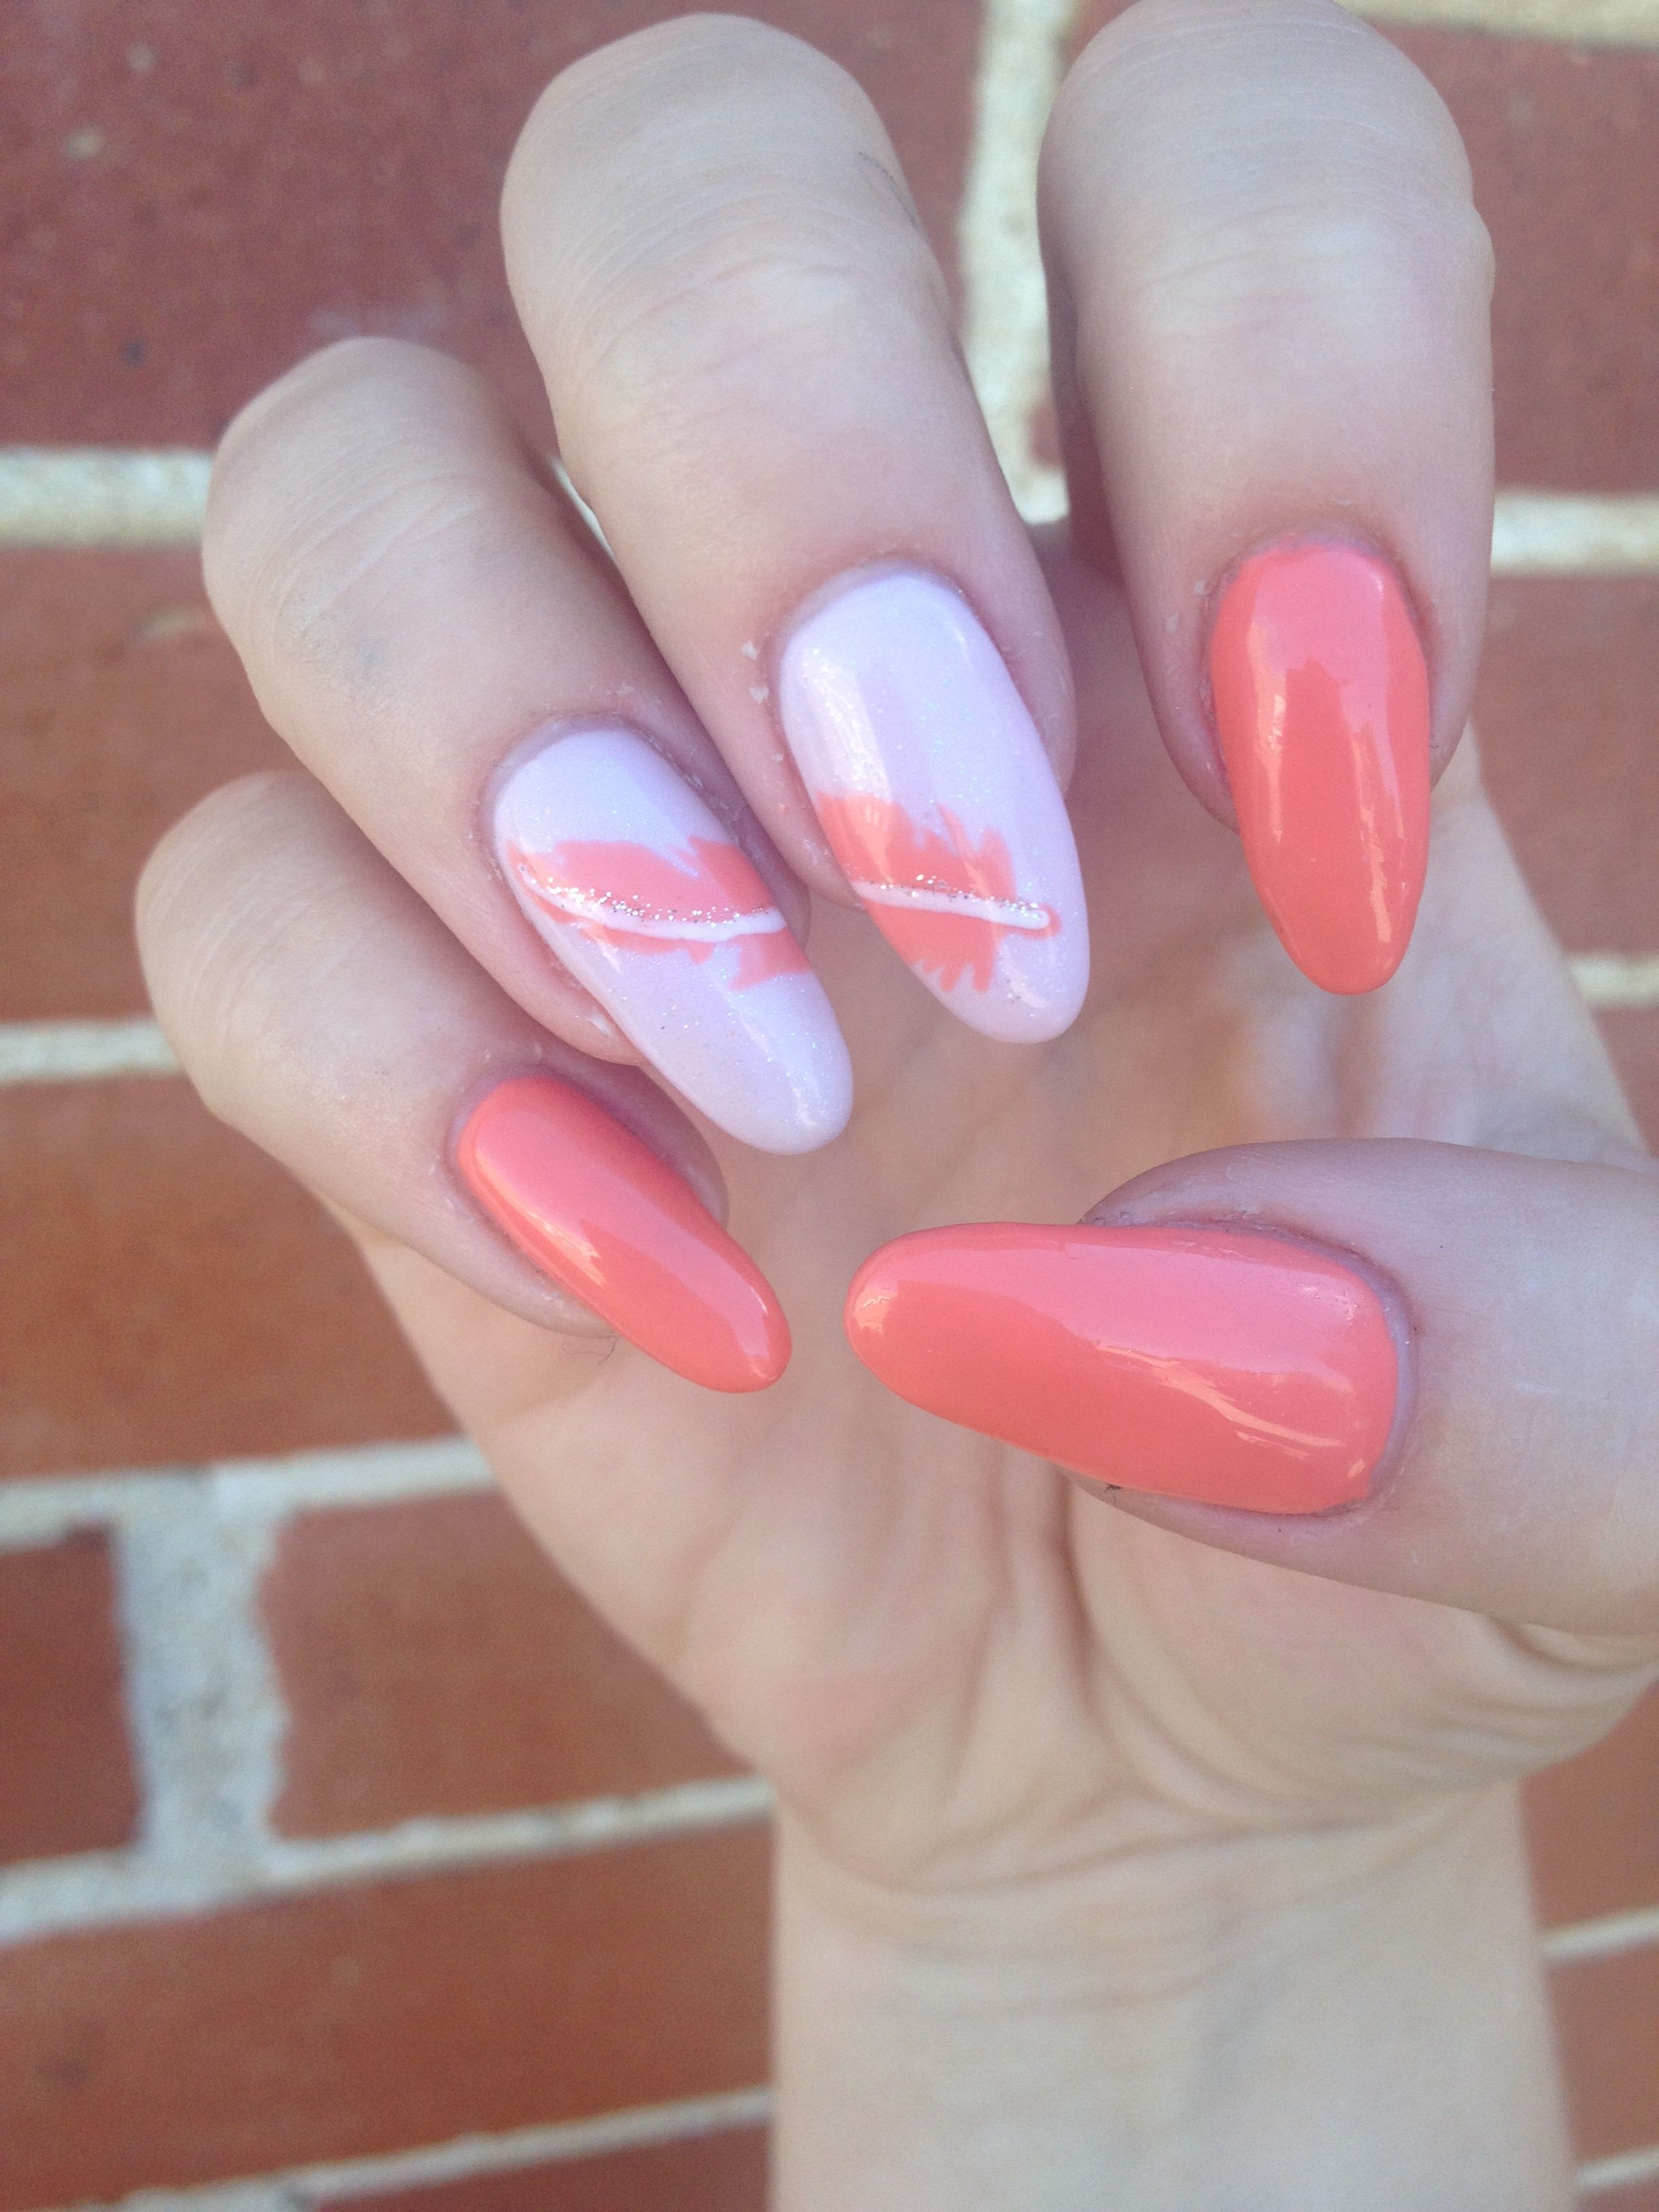 Ovale Nägel Nageldesign
 Cute coral almond oval nails with a freehand feather